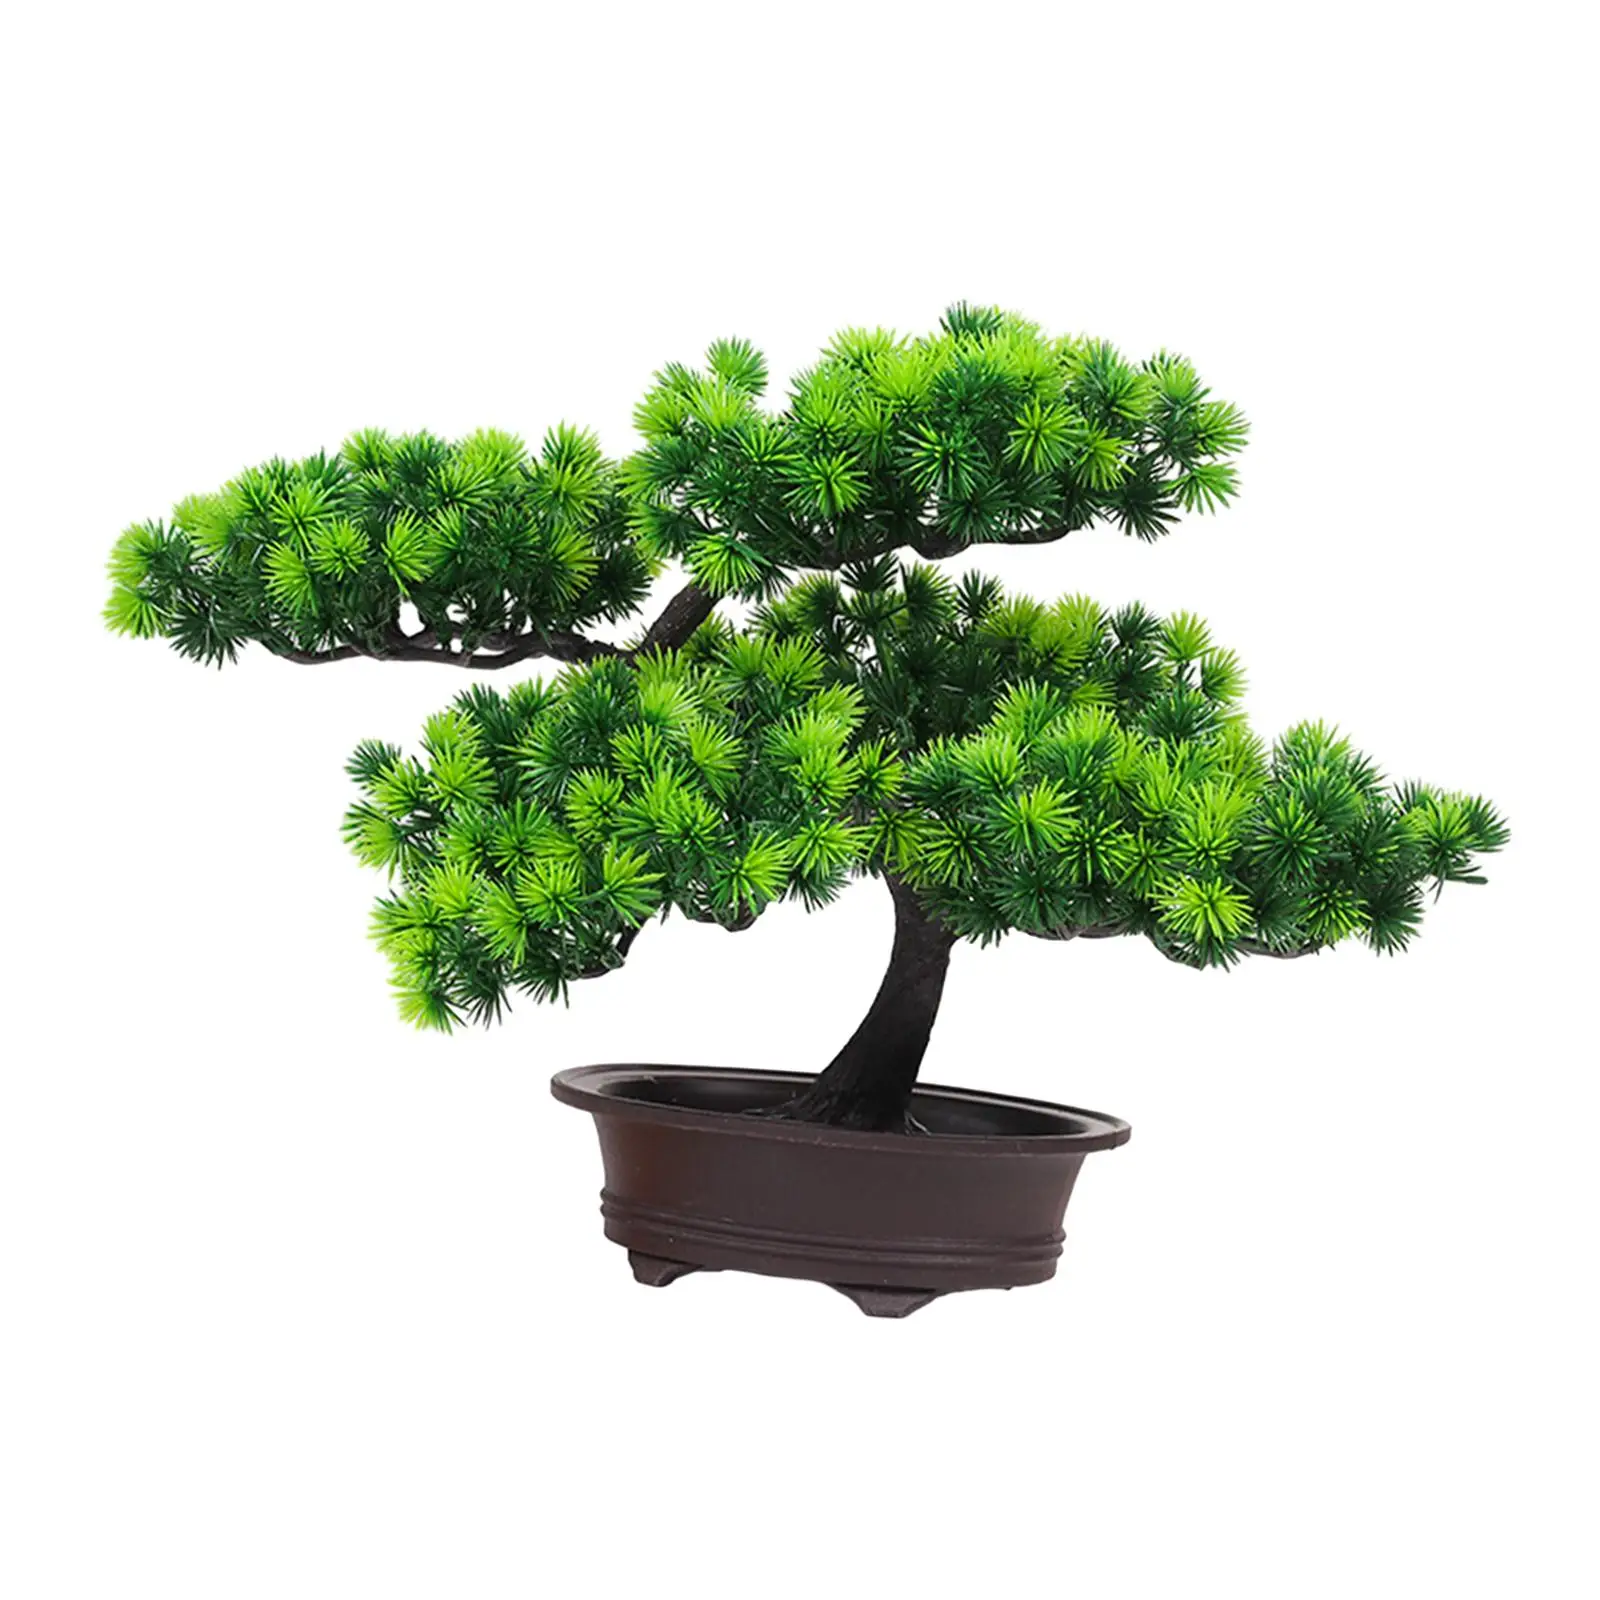 Artificial Potted Plants Welcoming Pine Tree Desk Ornament Lifelike Table Centerpiece for Bathroom Decor Sturdy Multipurpose